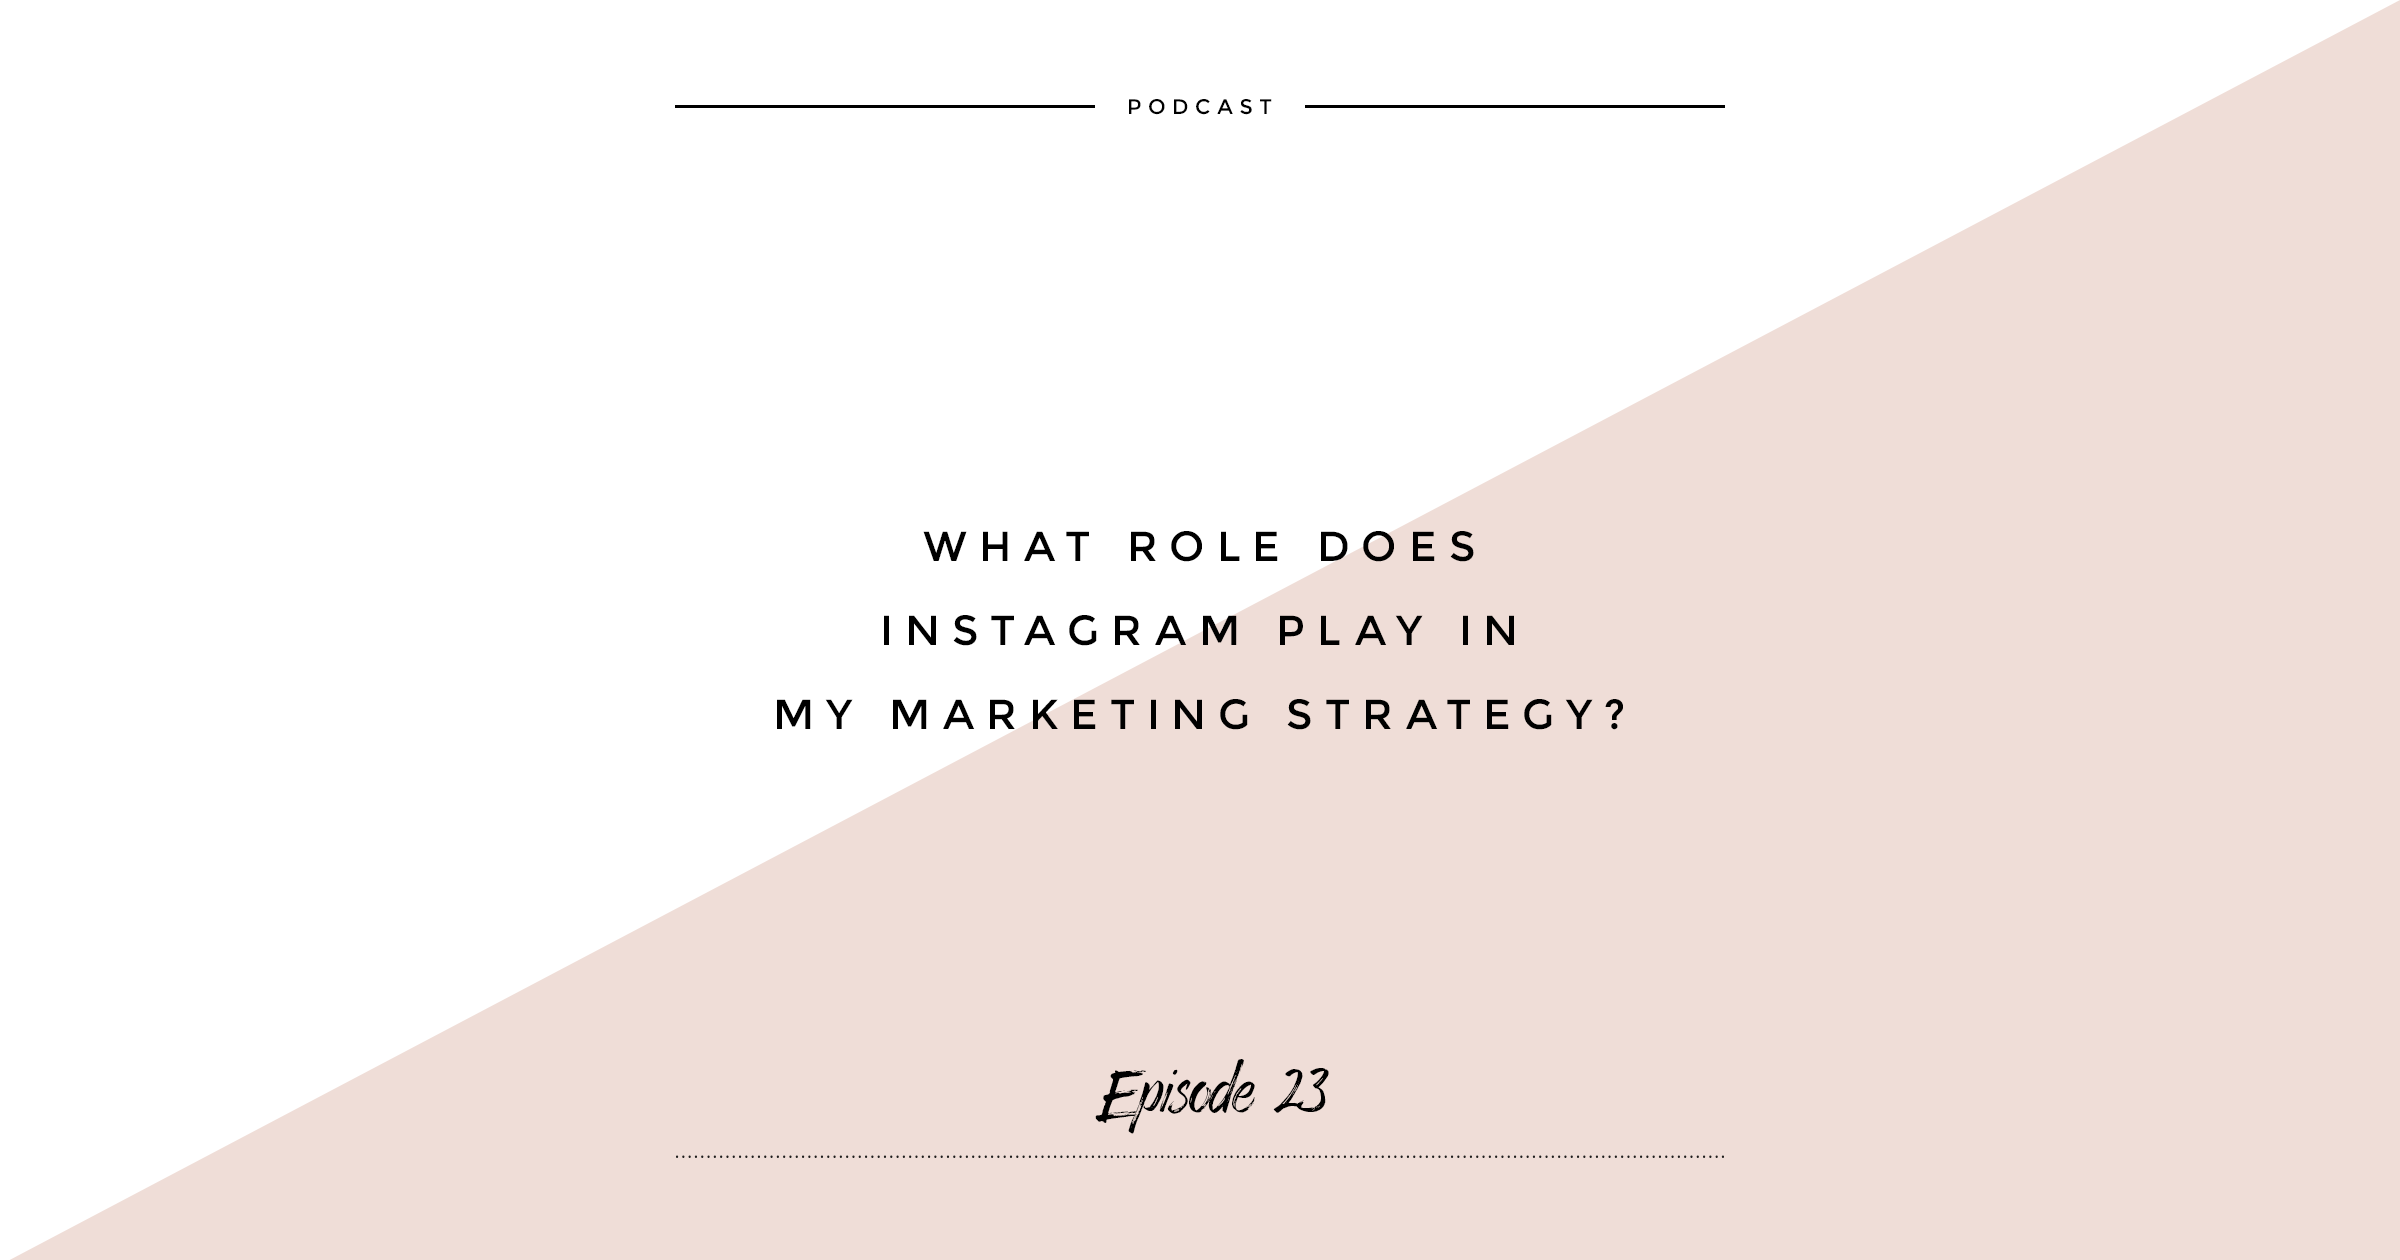 Where does instagram fit in marketing strategy